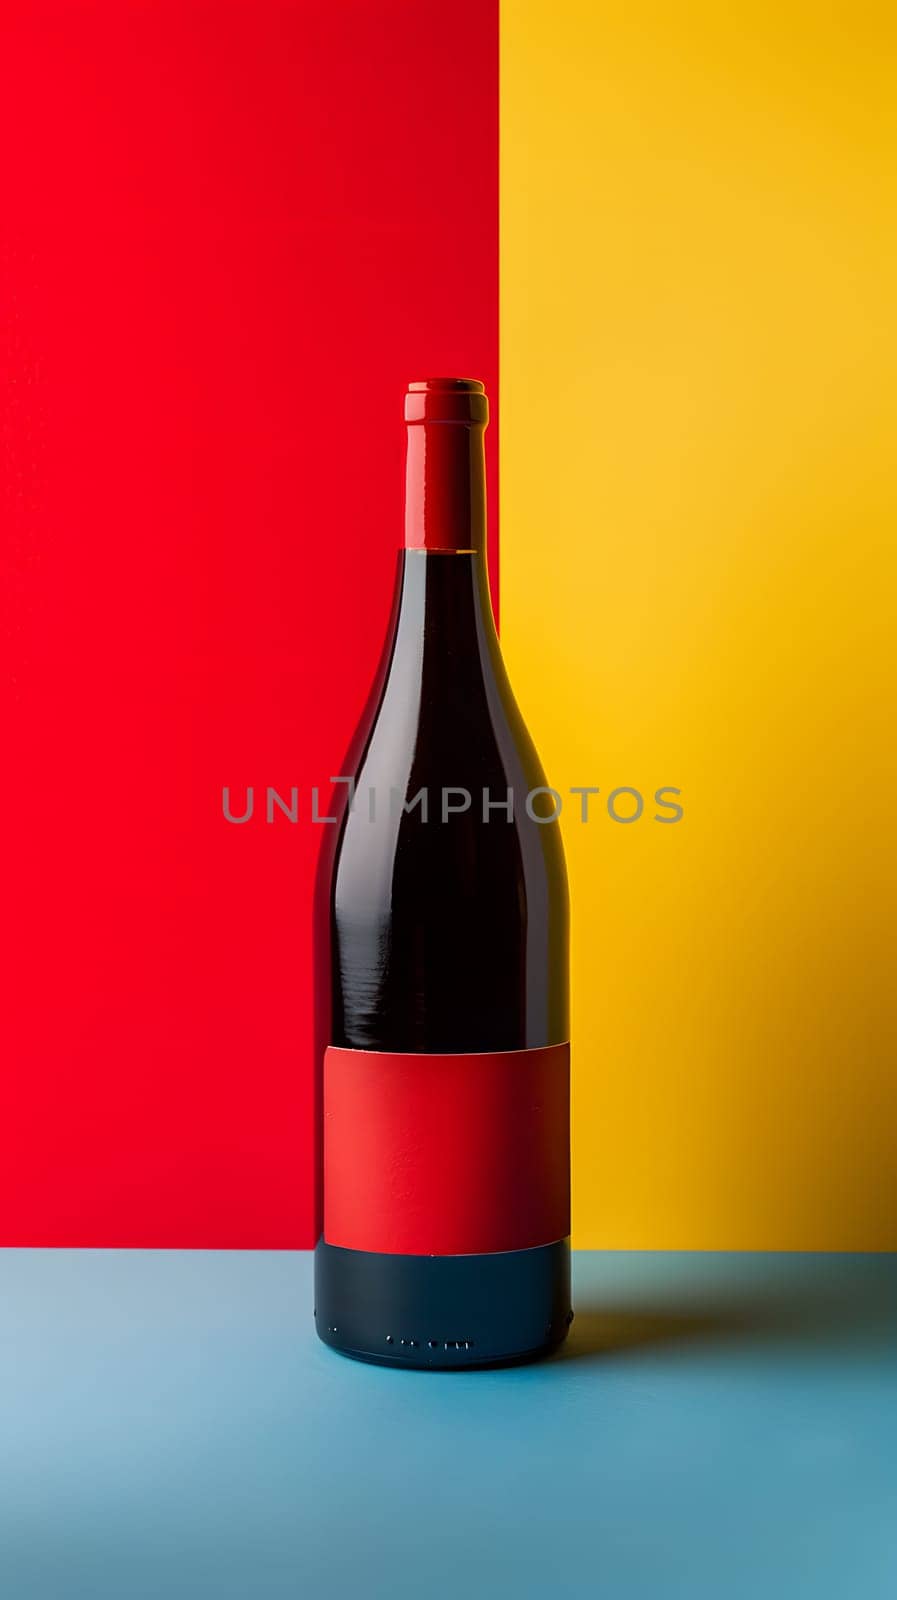 a bottle of wine with a red label on a red , yellow and blue background by Nadtochiy